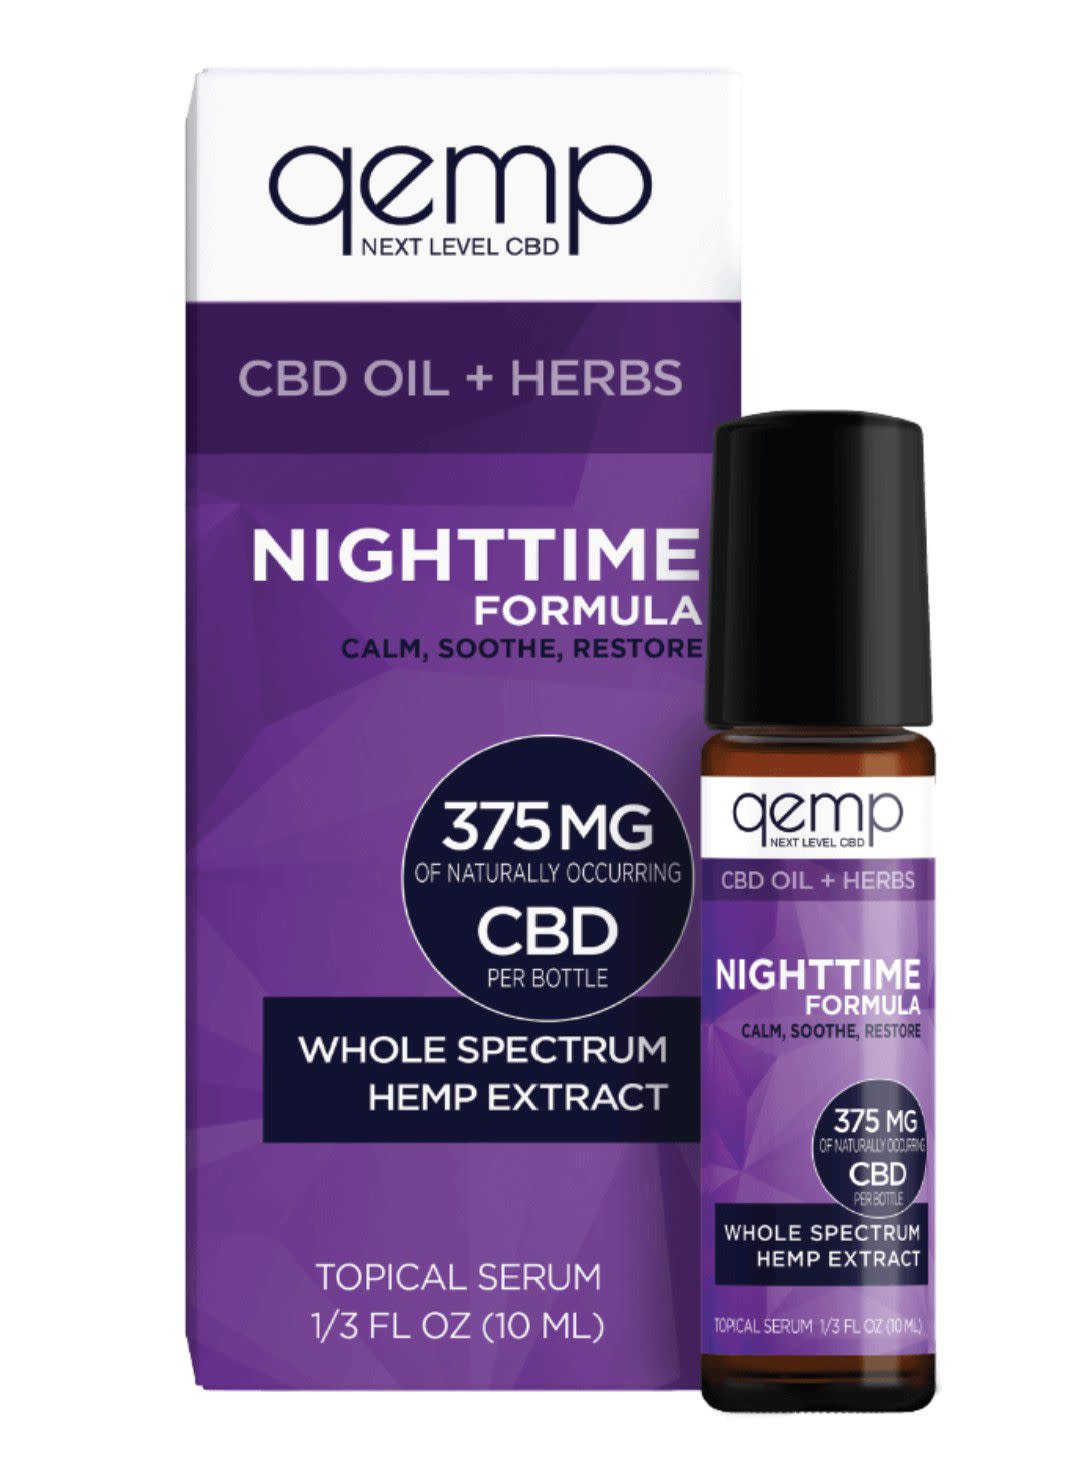 <p>This roll-on contains 375mg of CBD from whole-spectrum hemp extract, along with soothing, fragrant oils, such as lemongrass, lavender, rosemary and peppermint. You apply and massage it into the bottoms of your feet, the wrists, and the back of the neck. It smells absolutely divine and is a wonderful way to prepare for bed. </p><span class="copyright"> Qemp </span>